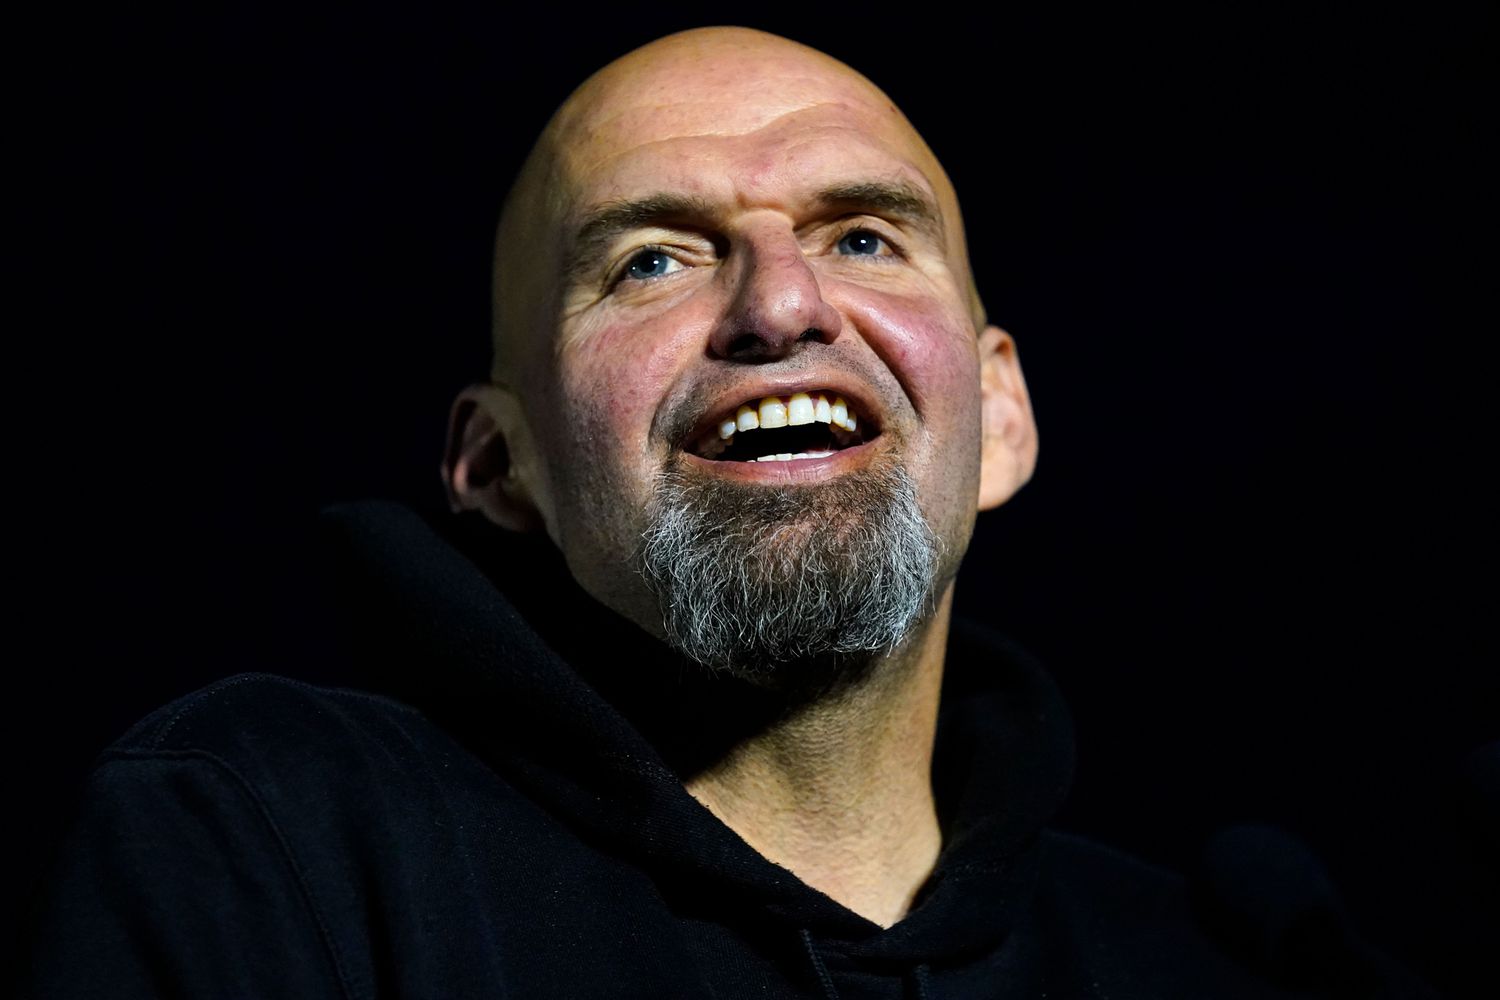 John Fetterman Checks Himself into Hospital for Clinical Depression: 'Getting the Care He Needs'